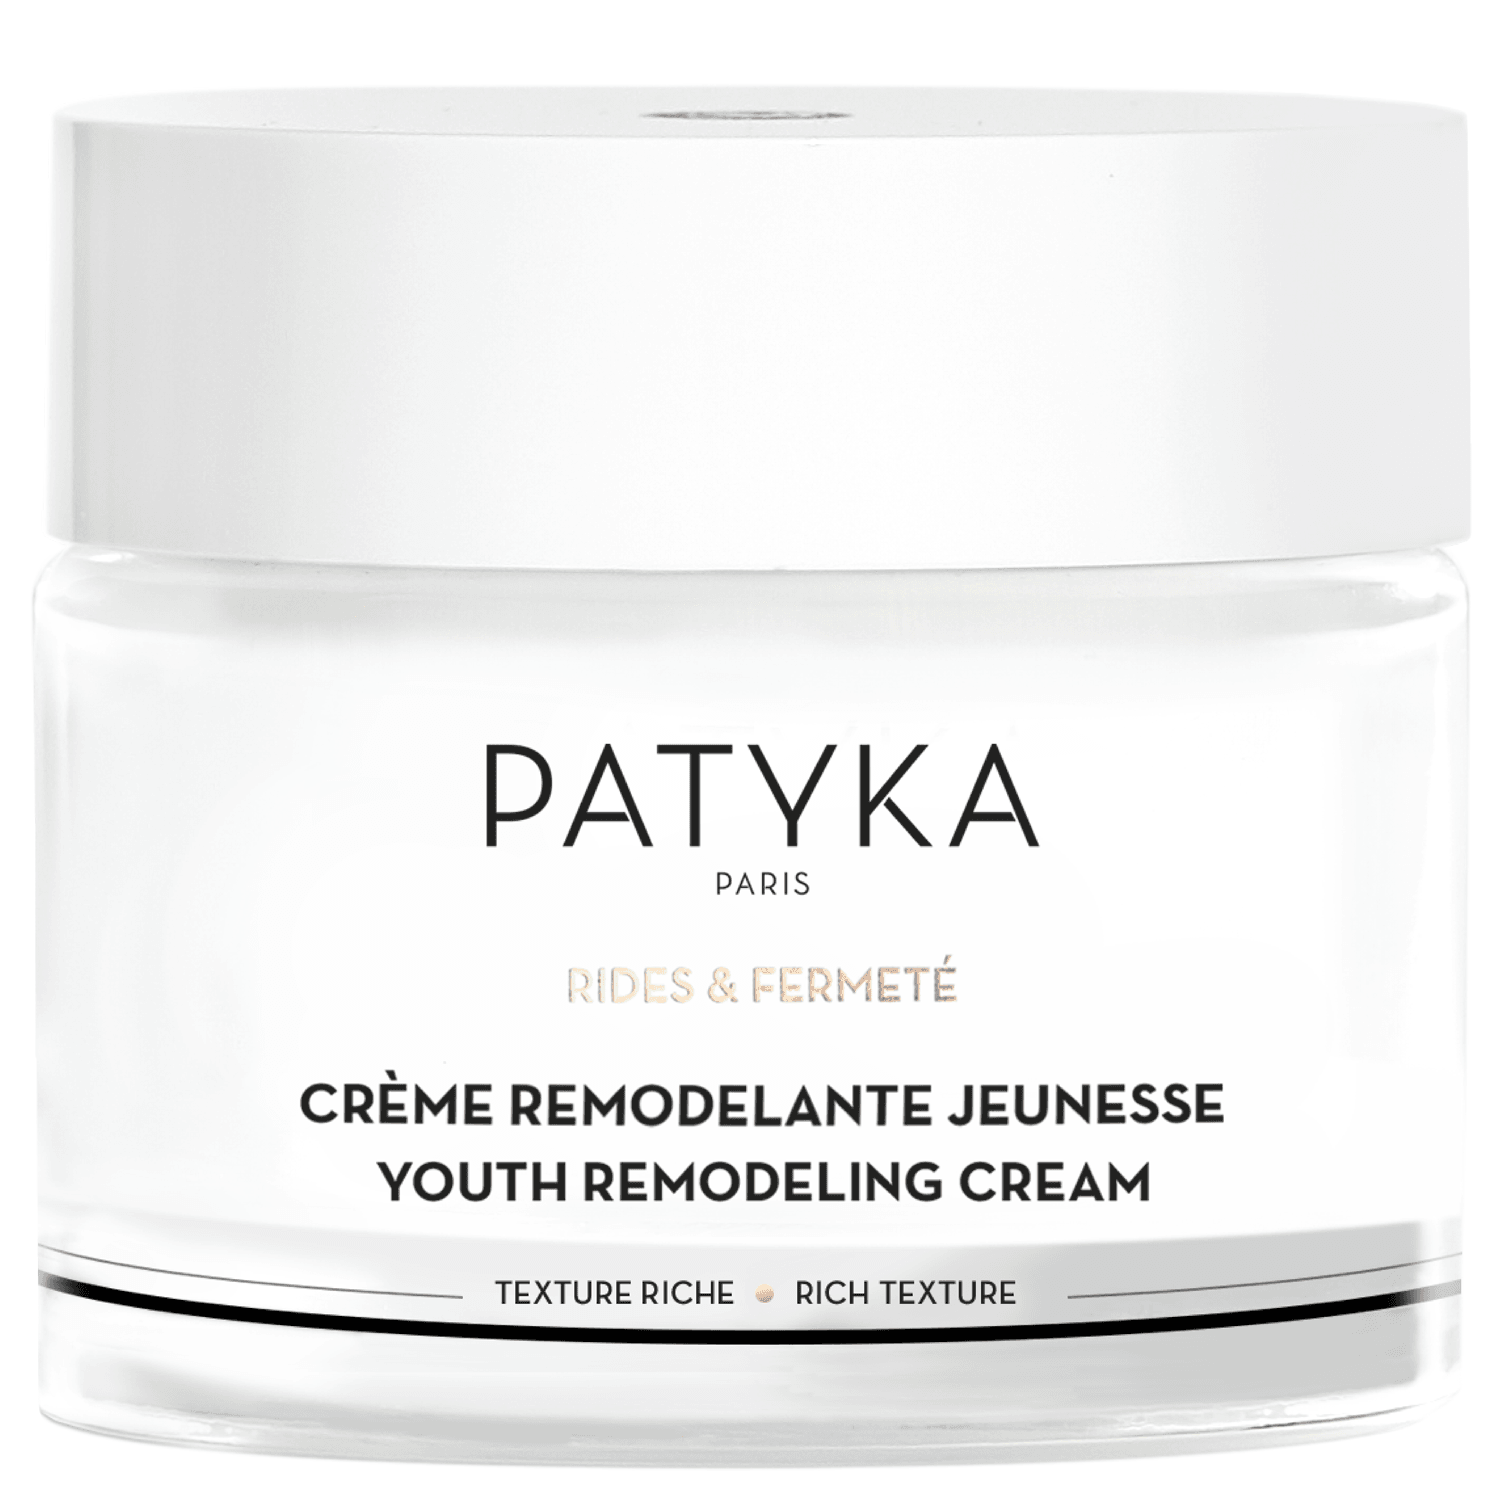 PATYKA Youth Remodeling Cream - Rich Texture at Socialite Beauty Canada